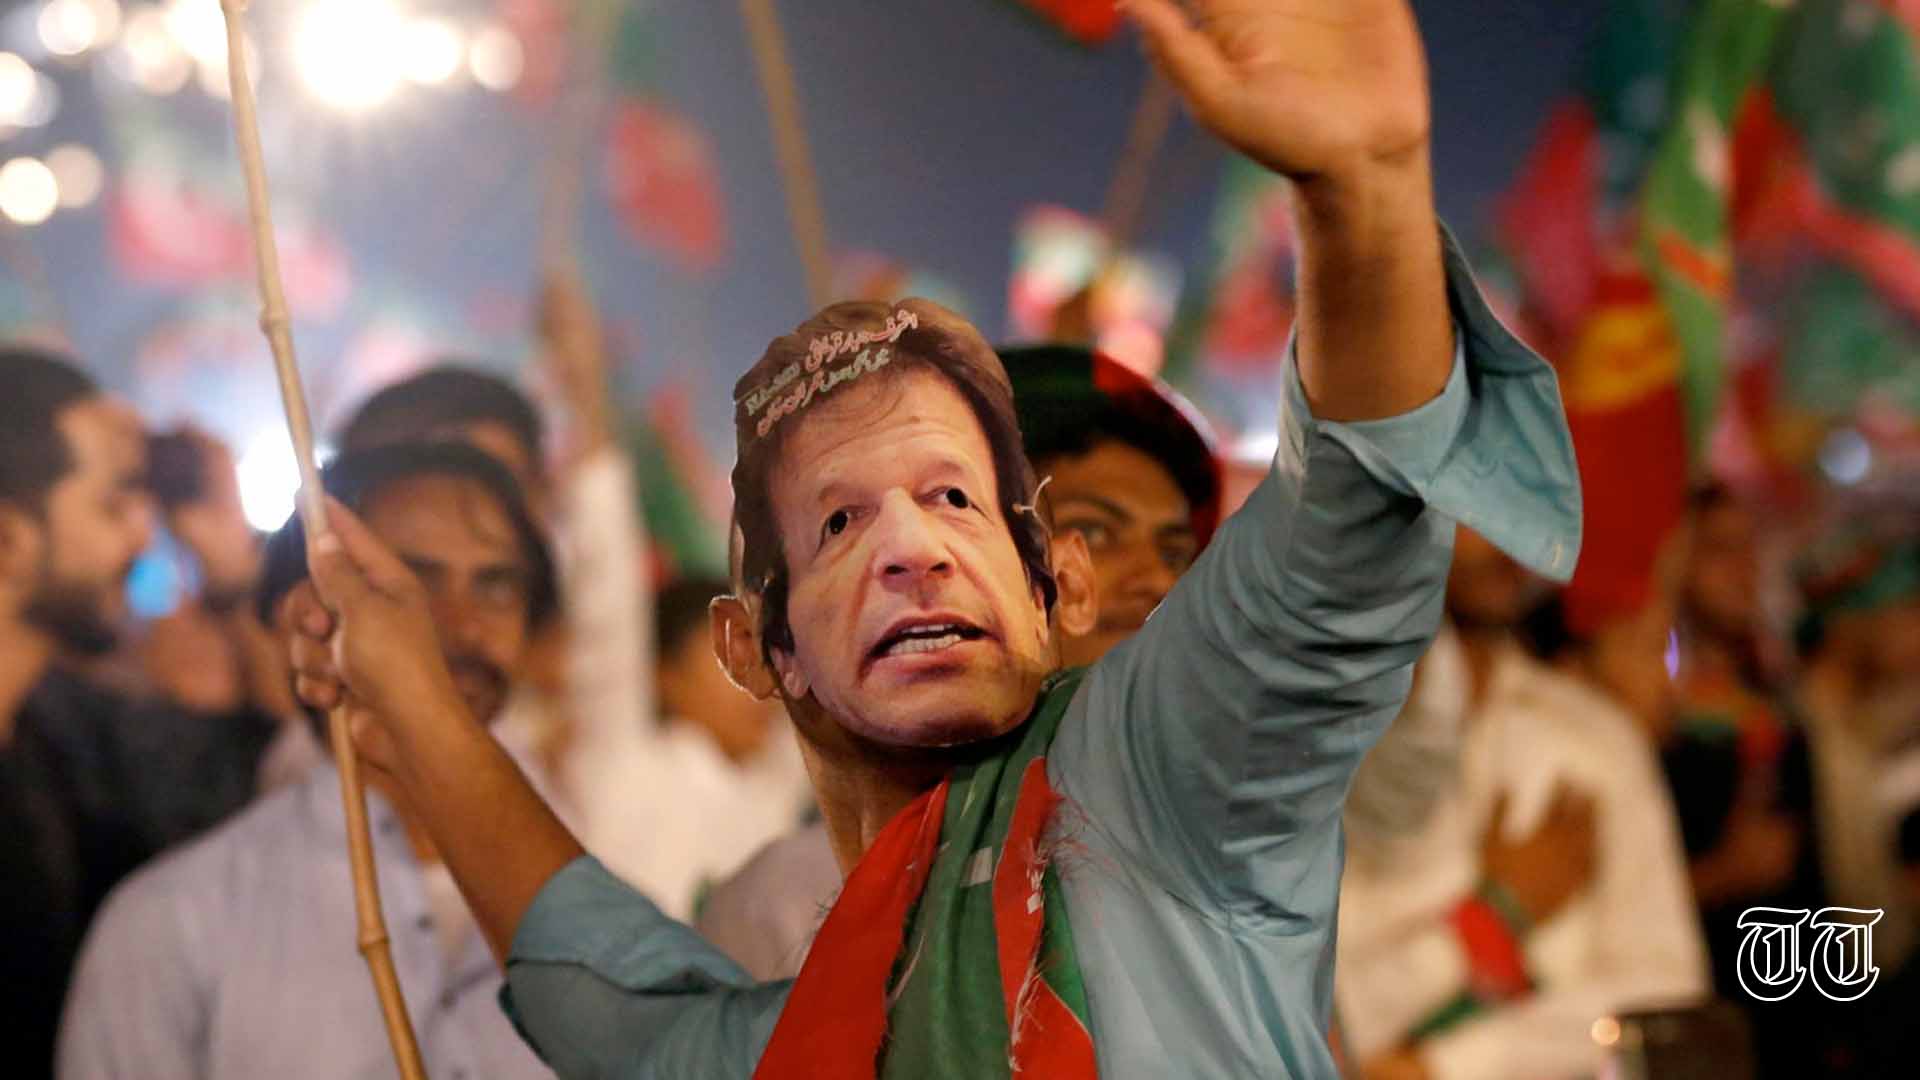 A file photo is shown of a PTI supporter at a rally.